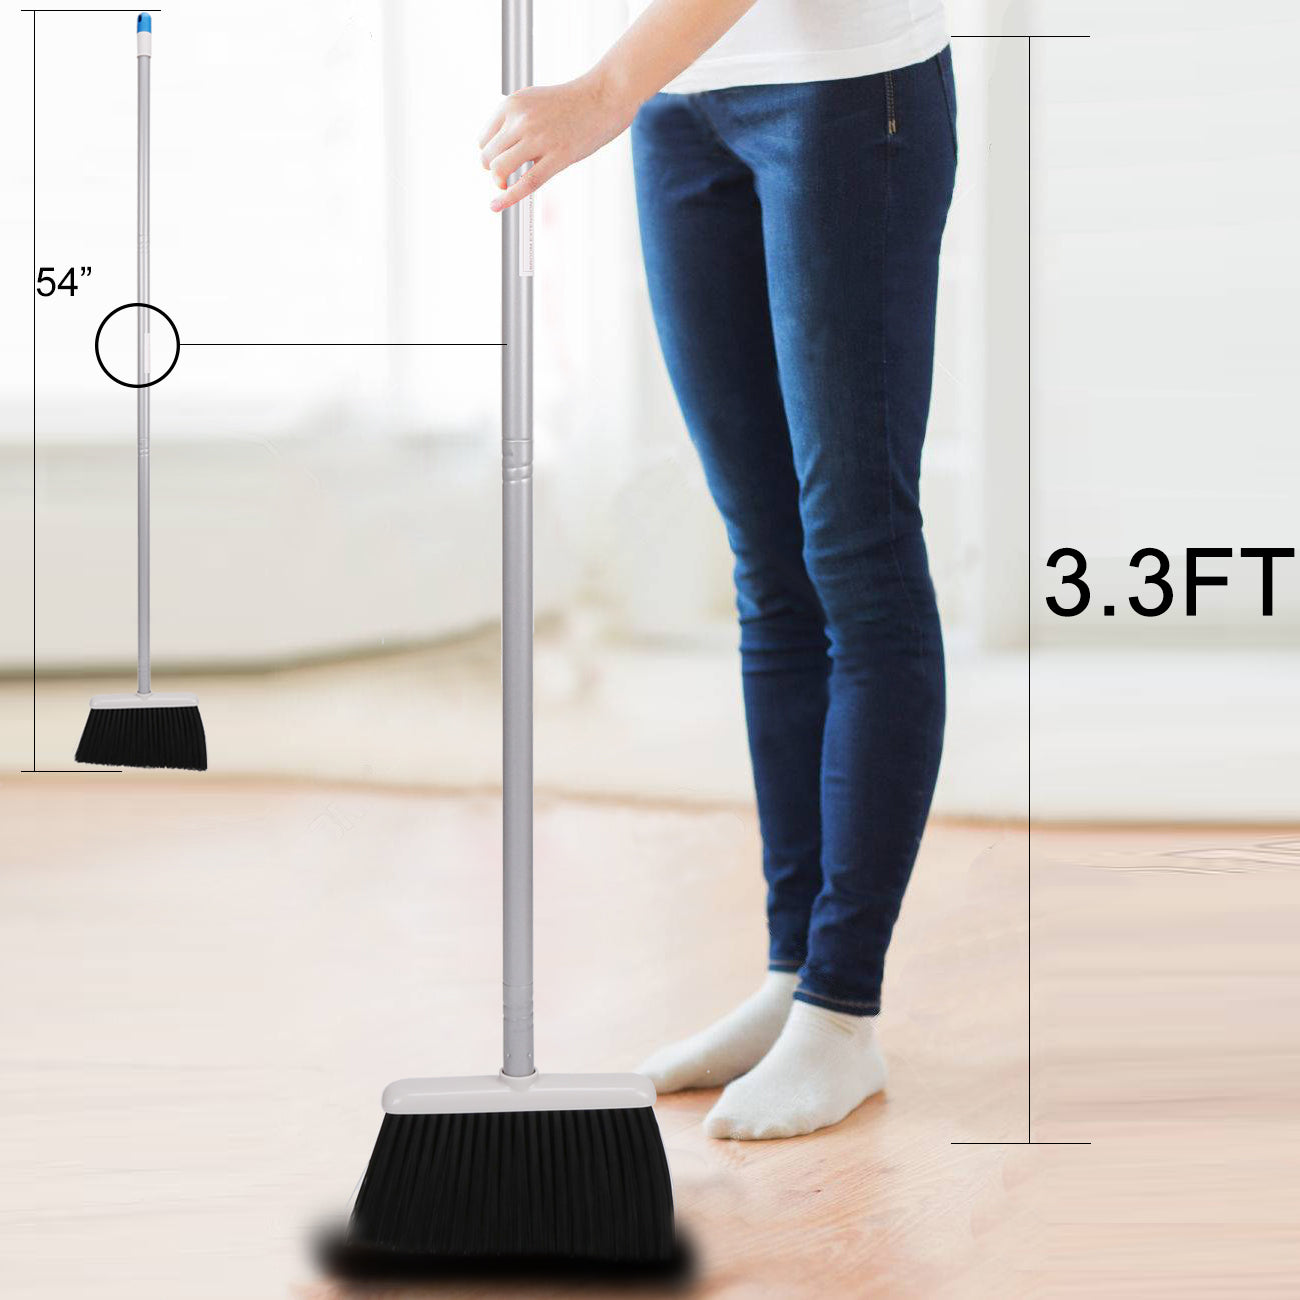 Broom and Dustpan Set Upright Standing Cleaning Set for Indoor